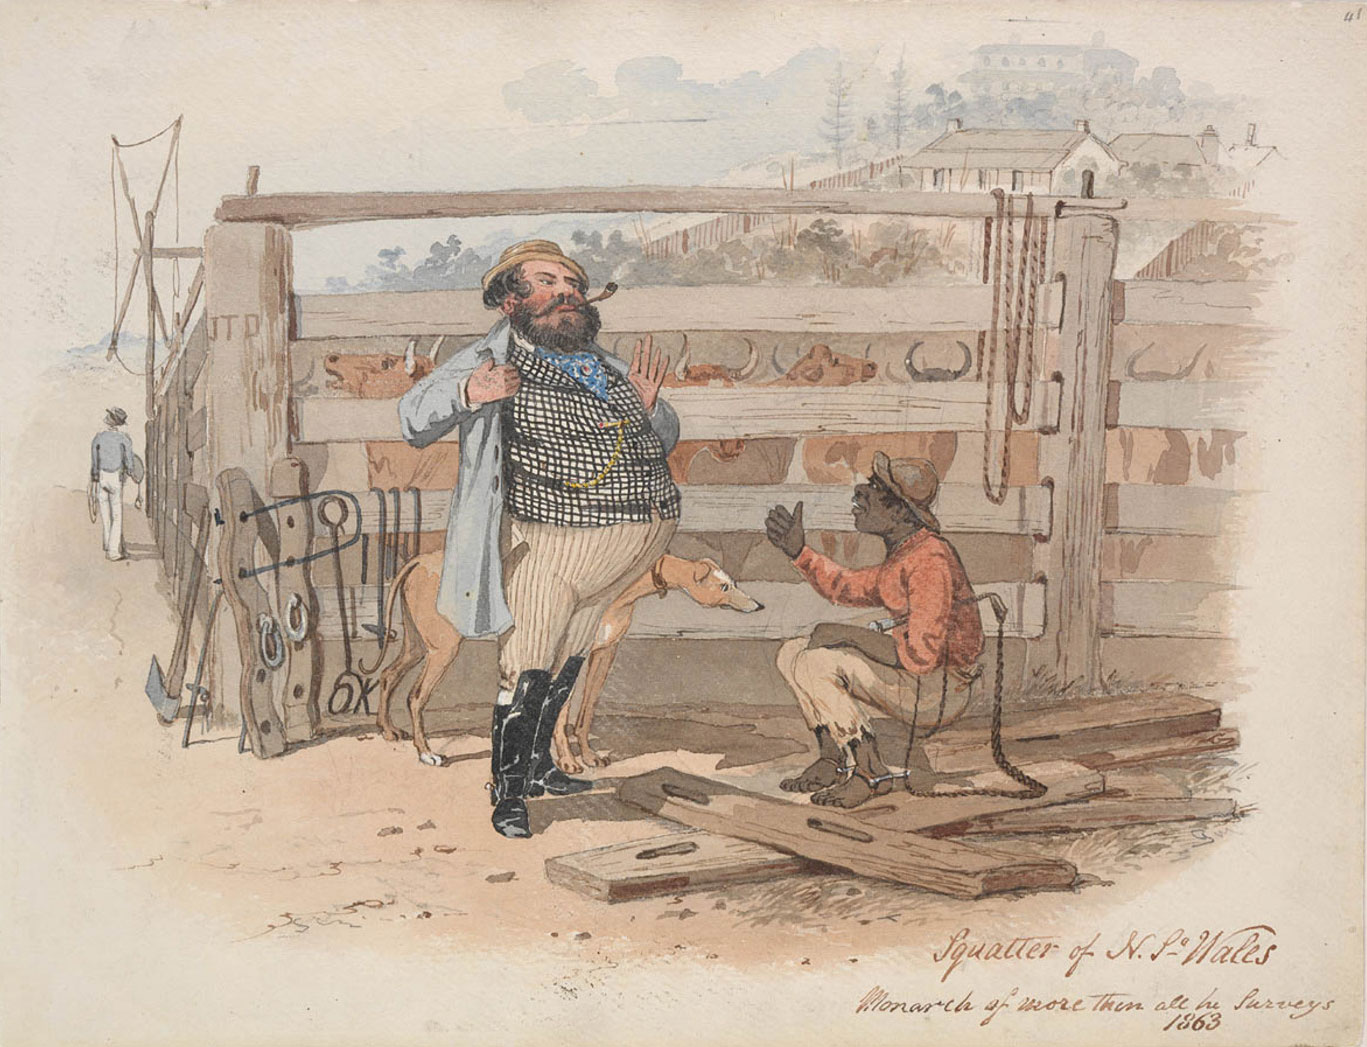 <p><em>Squatter of N.S.Wales: Monarch of more than all he surveys, </em>by Samuel Thomas Gill, 1863</p>
